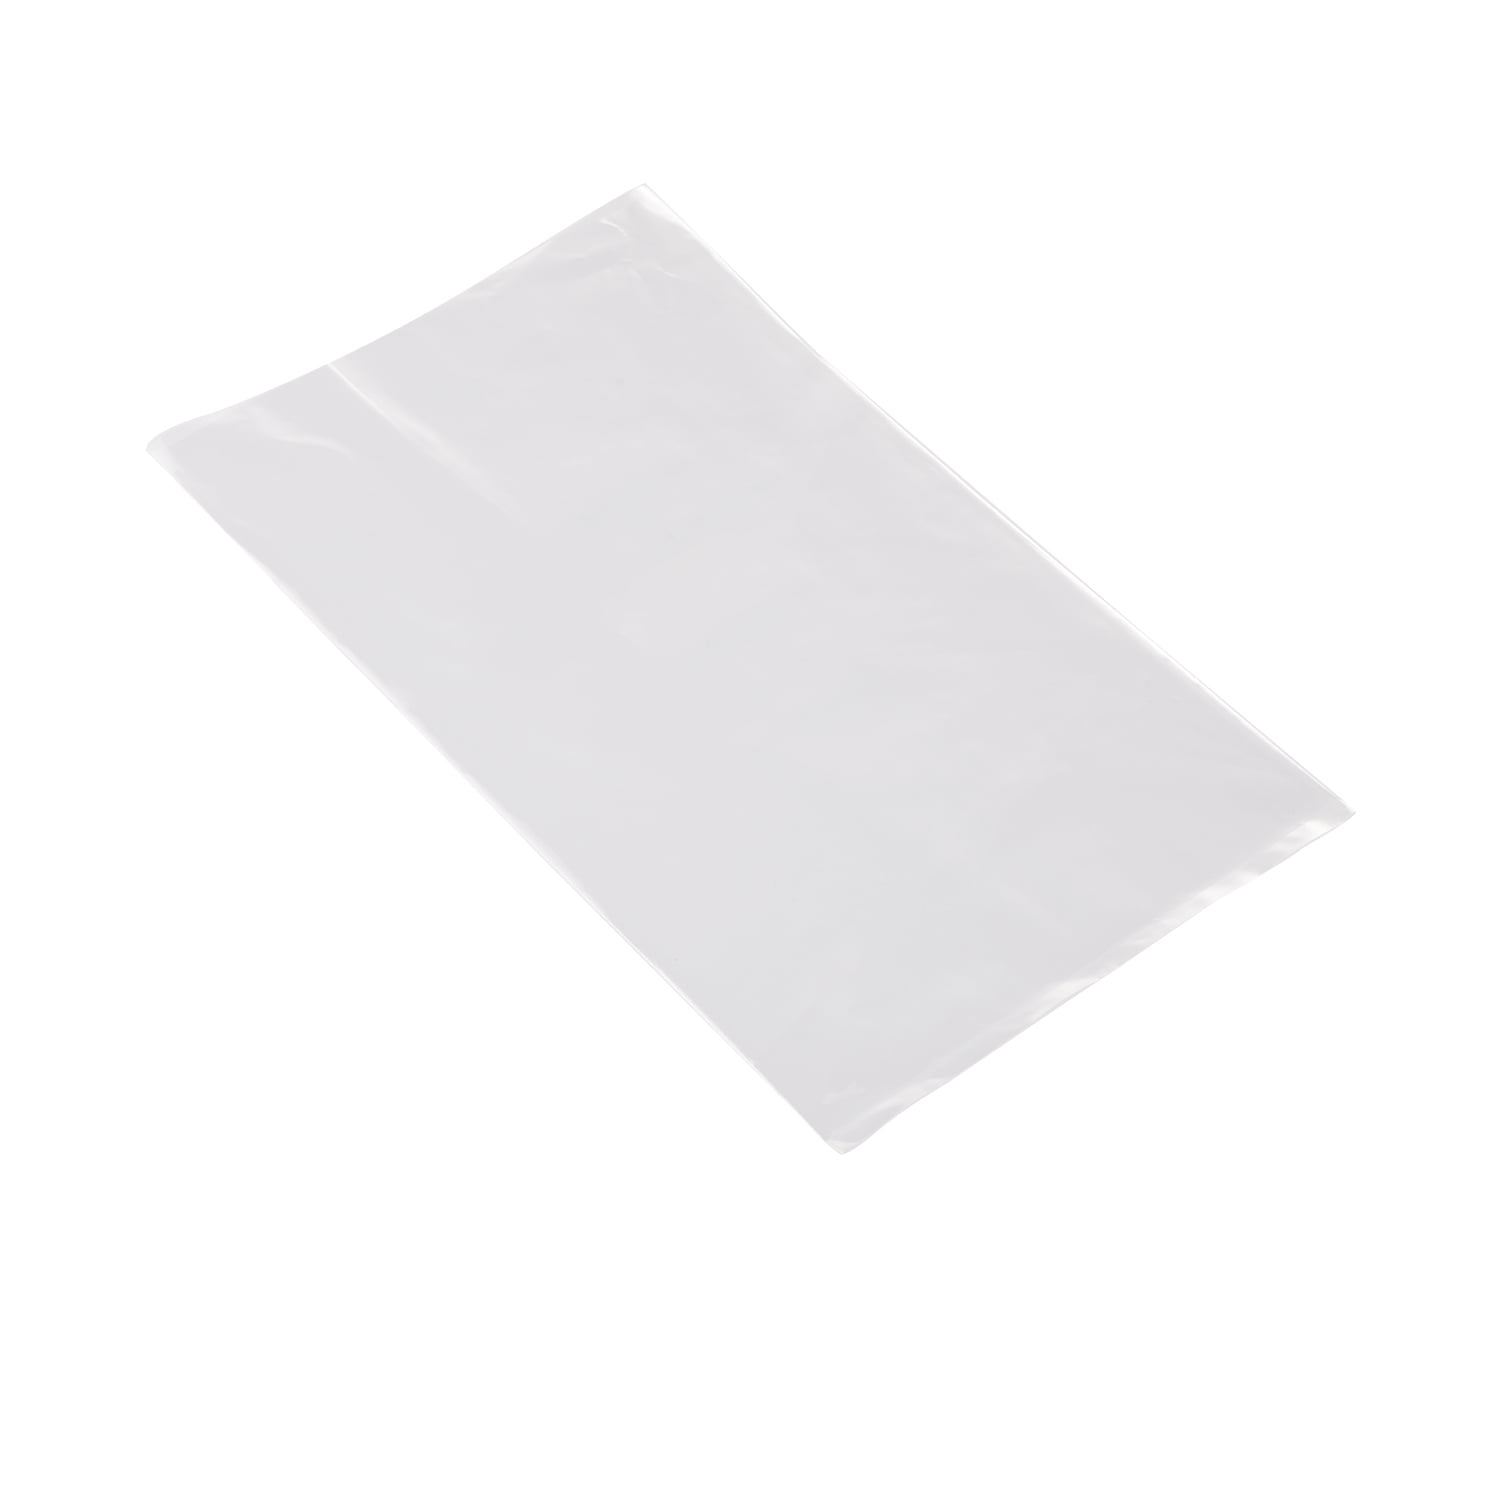 1000 4 Mil 10x12 Owlpack Clear Poly Open End No Seal Plastic & Storage Bags 